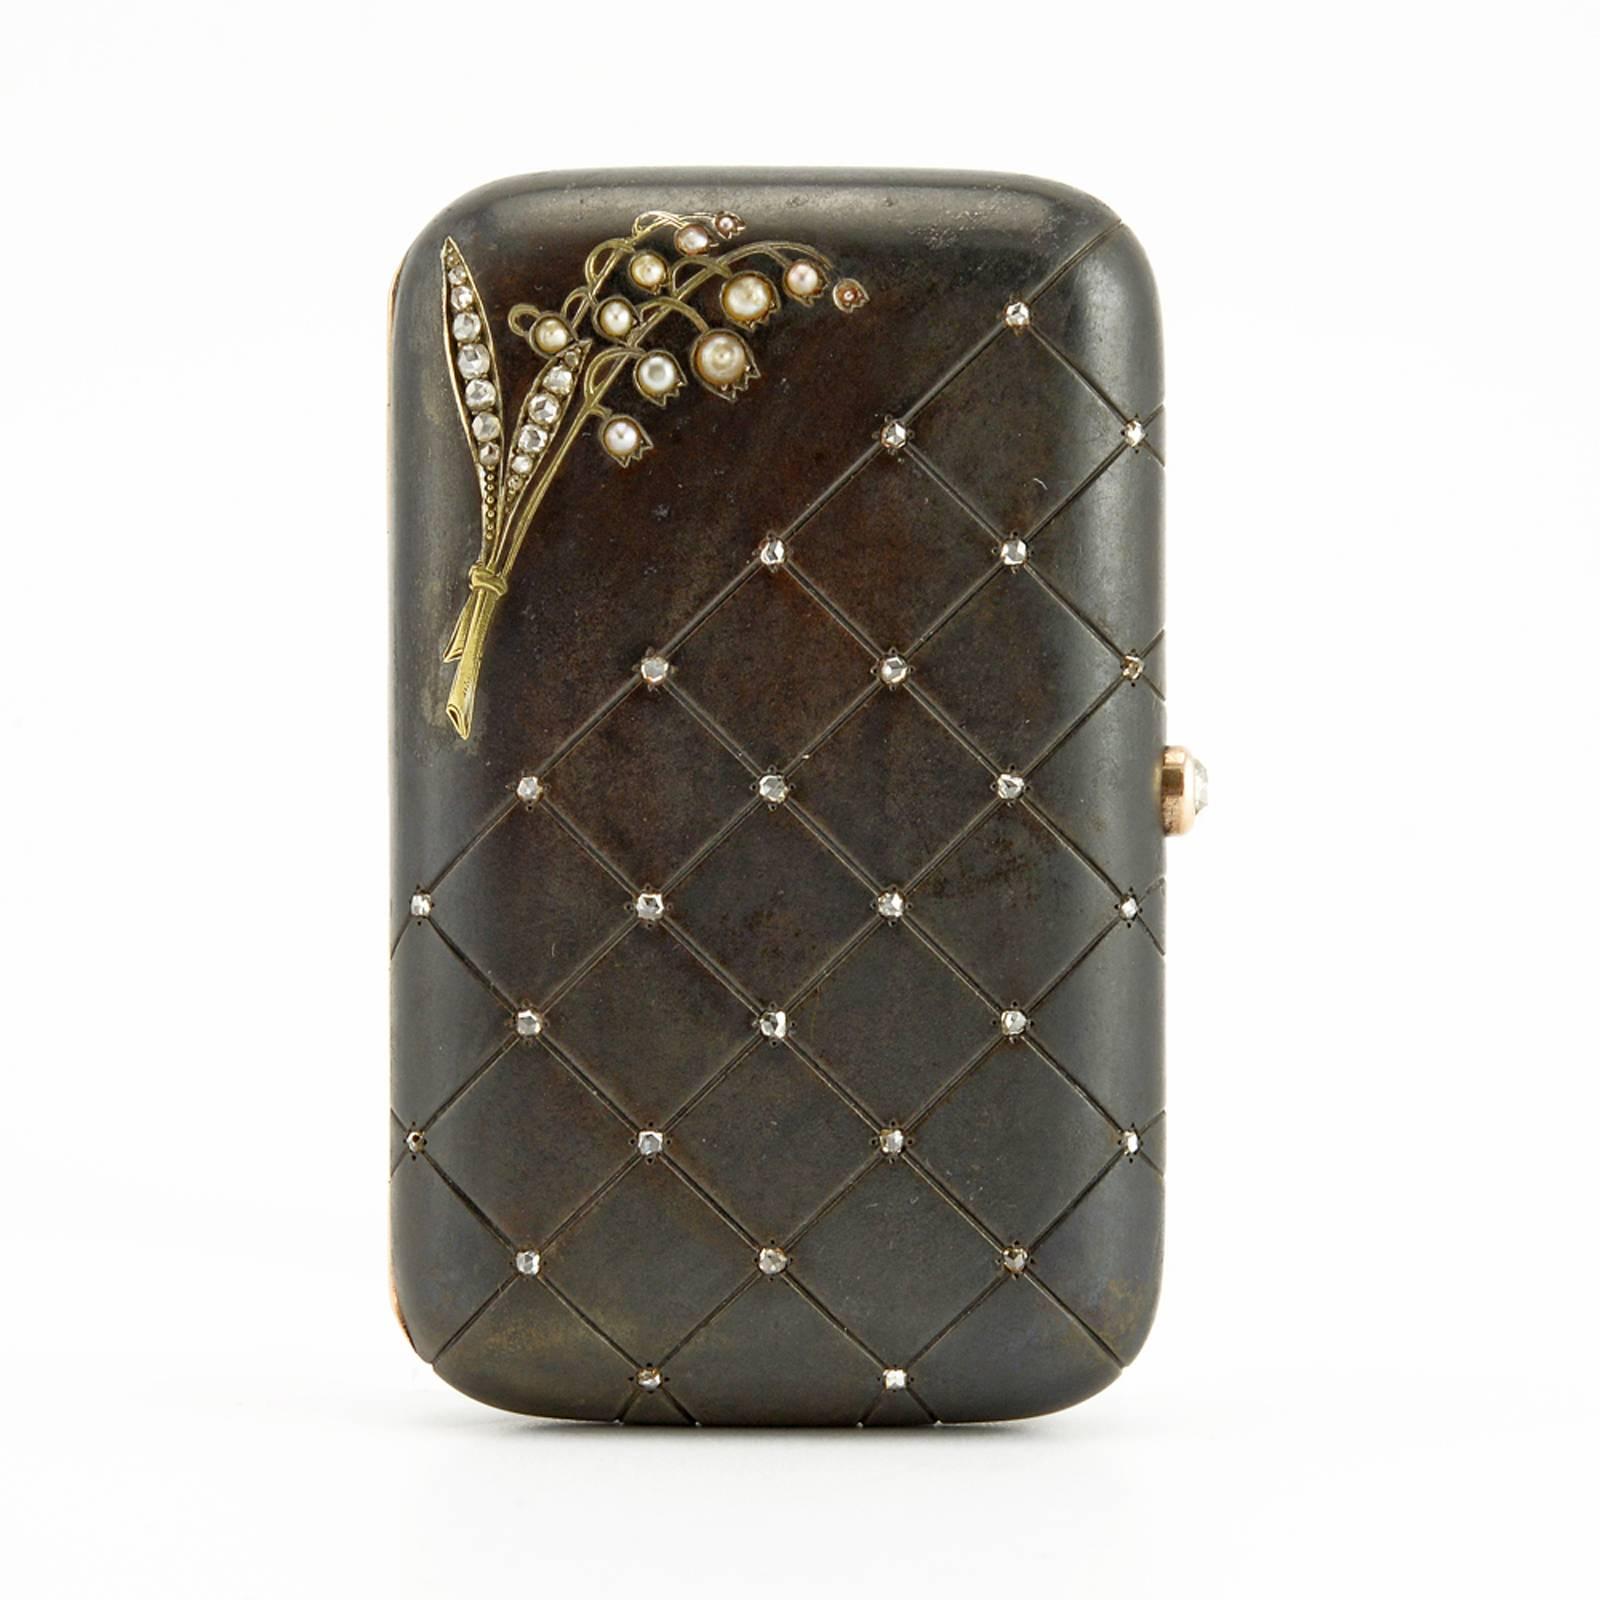 A Russian jeweled gold-mounted gunmetal cigarette case, circa 1900, apparently unmarked but almost certainly by Imperial Court Jeweler Bolin (see references below). Rounded rectangular, both of the hinged covers partially engraved in a net pattern